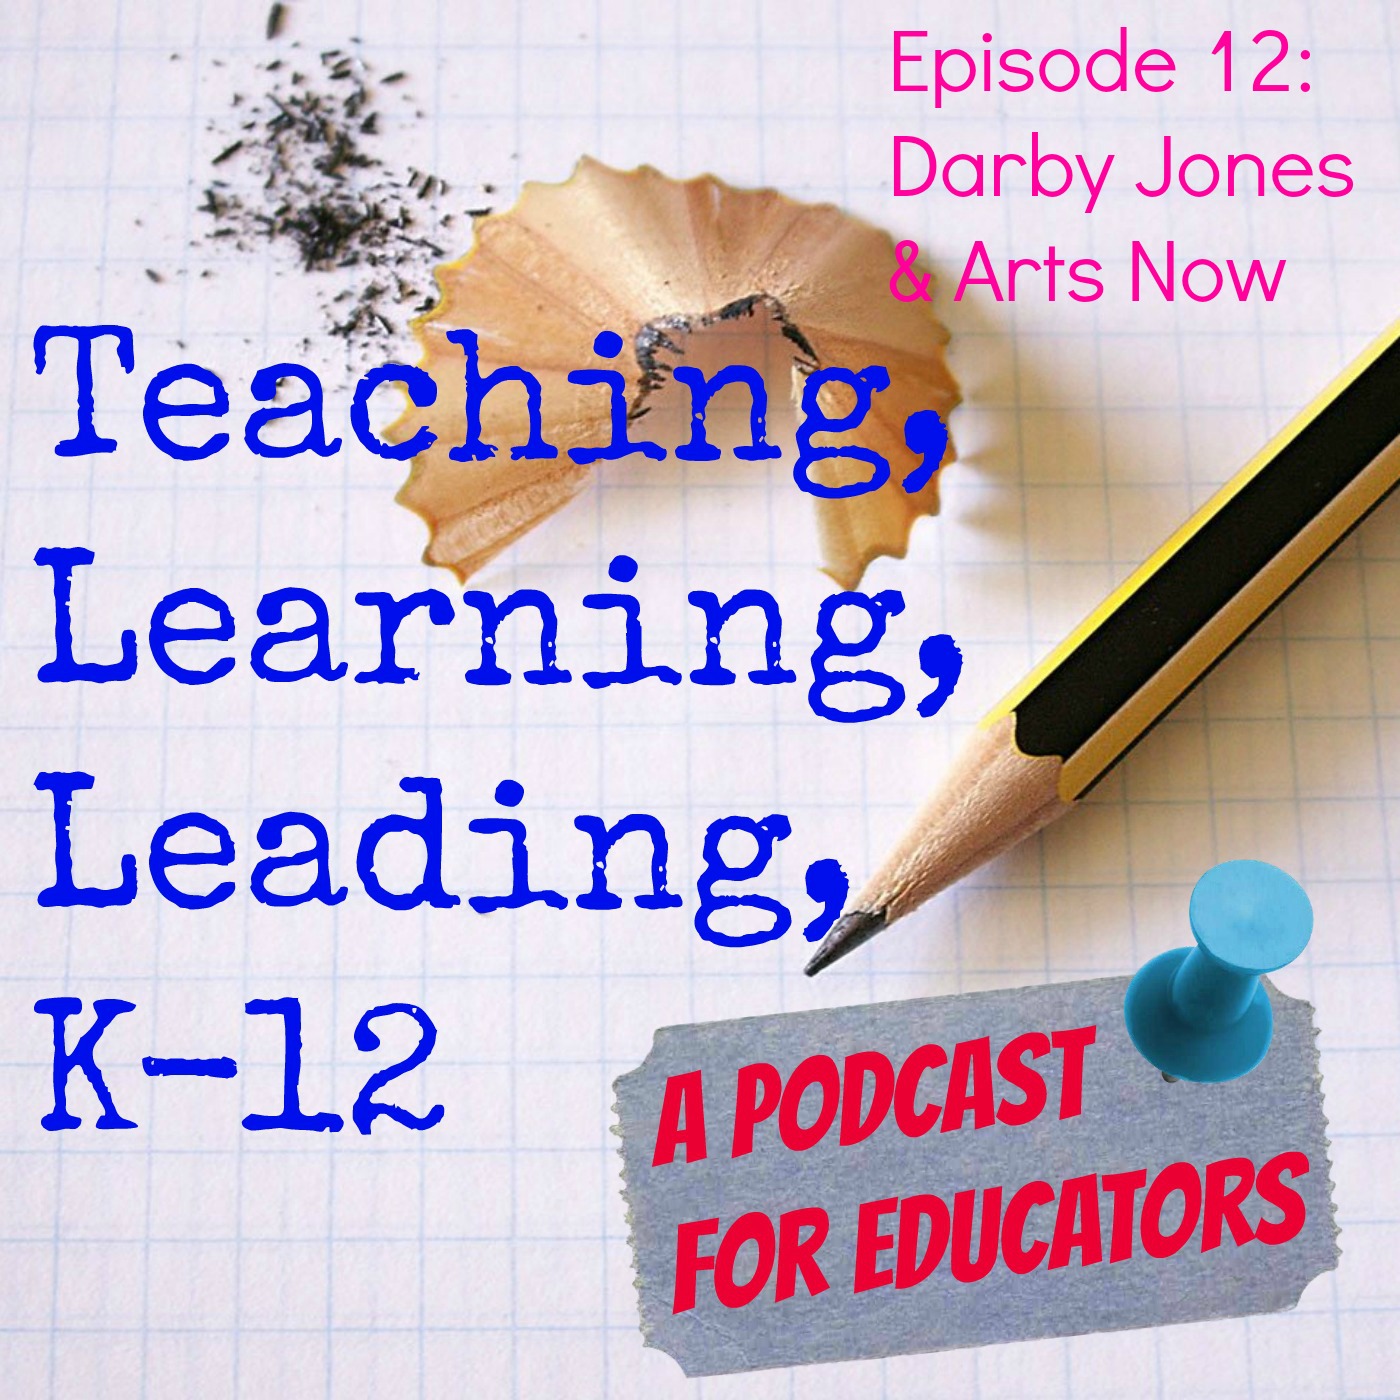 Episode 12: Darby Jones & Arts Now: Improving Education Through the Arts